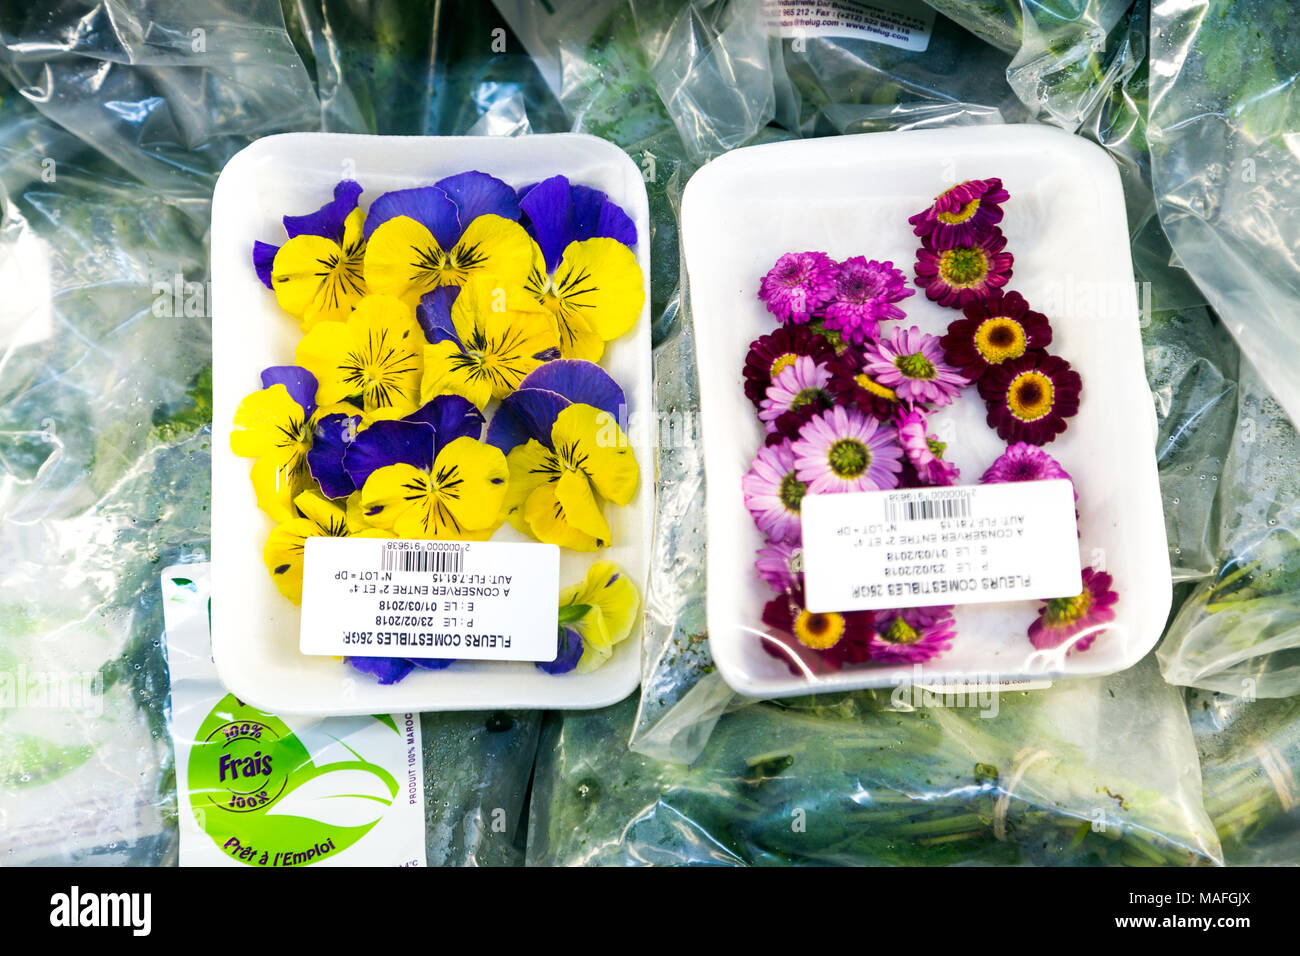 Edible flowers for sale at a supermarket (Morocco) Stock Photo